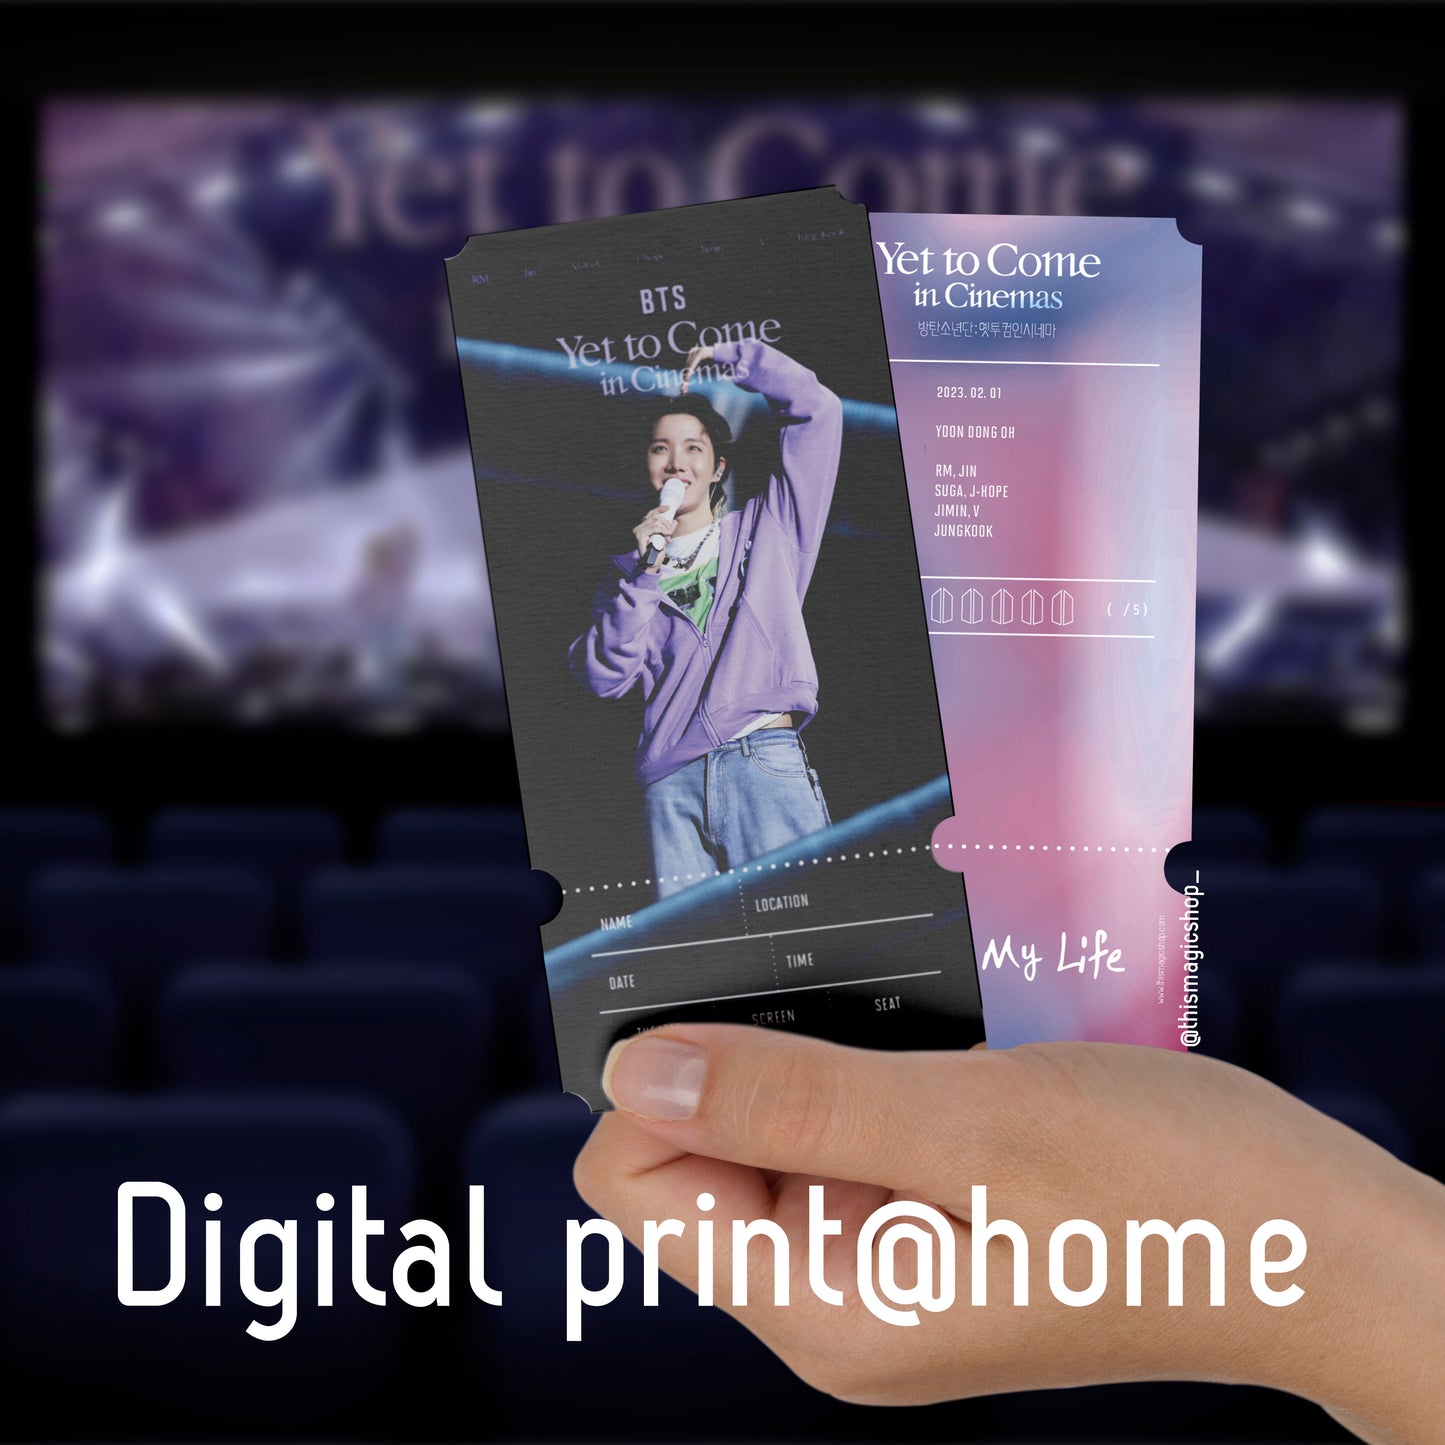 EDITABLE Yet To Come in Cinema Member Digital print at home ticket ytc